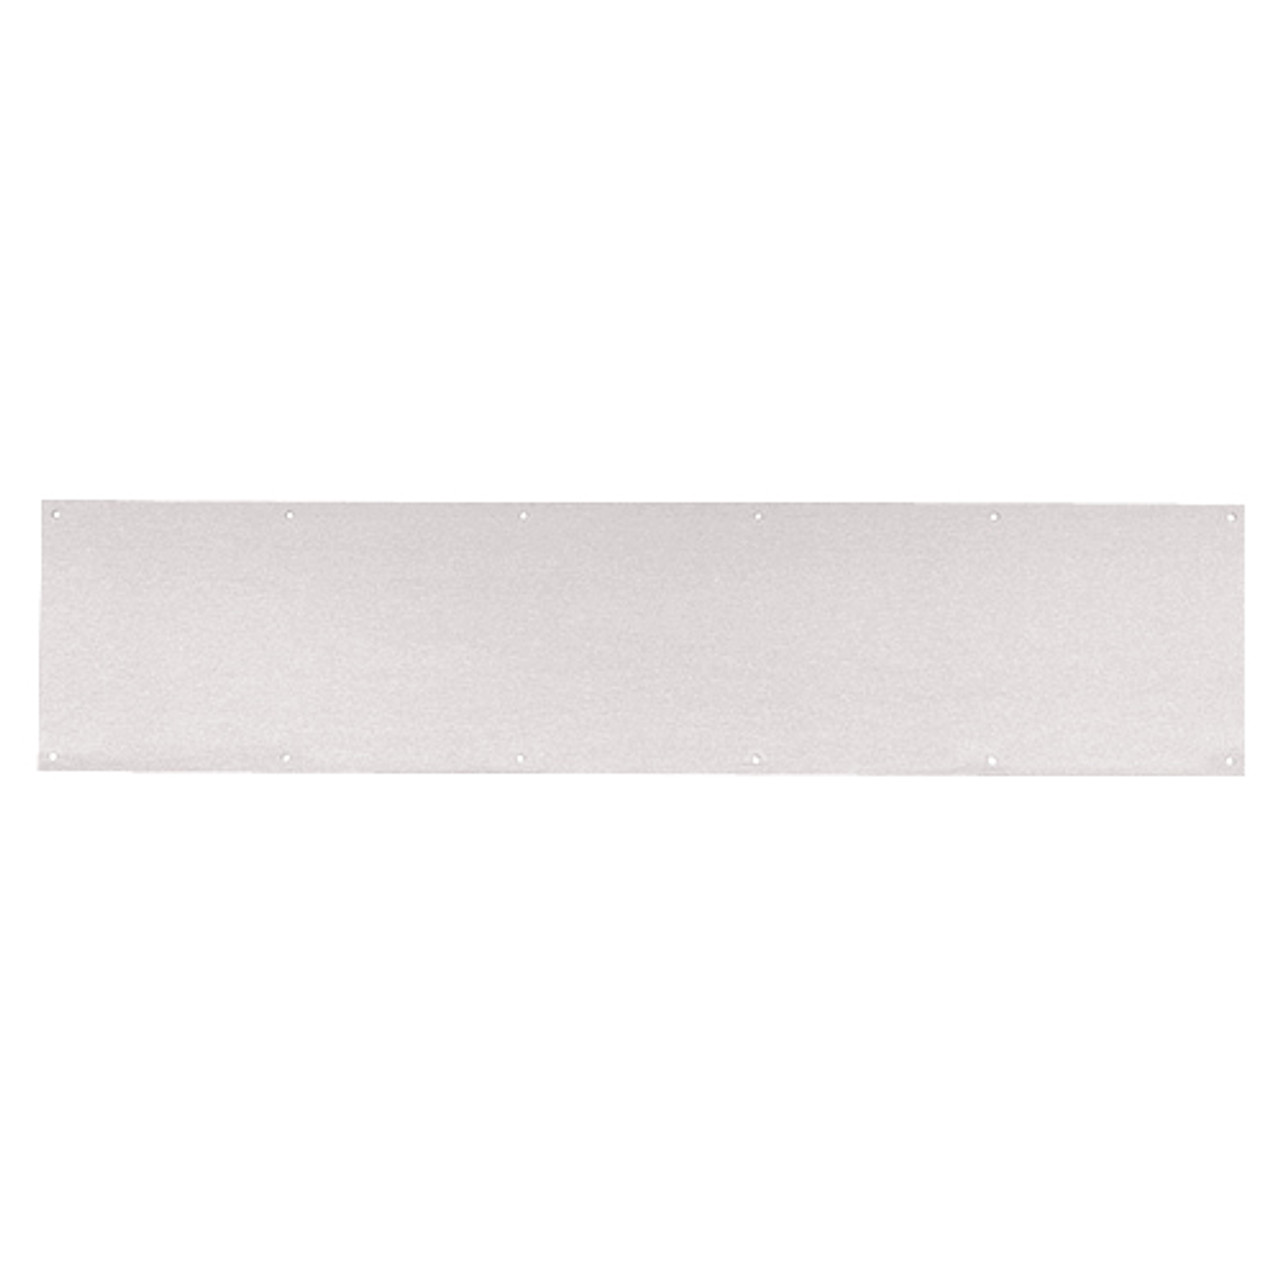 8400-US32-12x28-B-CS Ives 8400 Series Protection Plate in Bright Stainless Steel